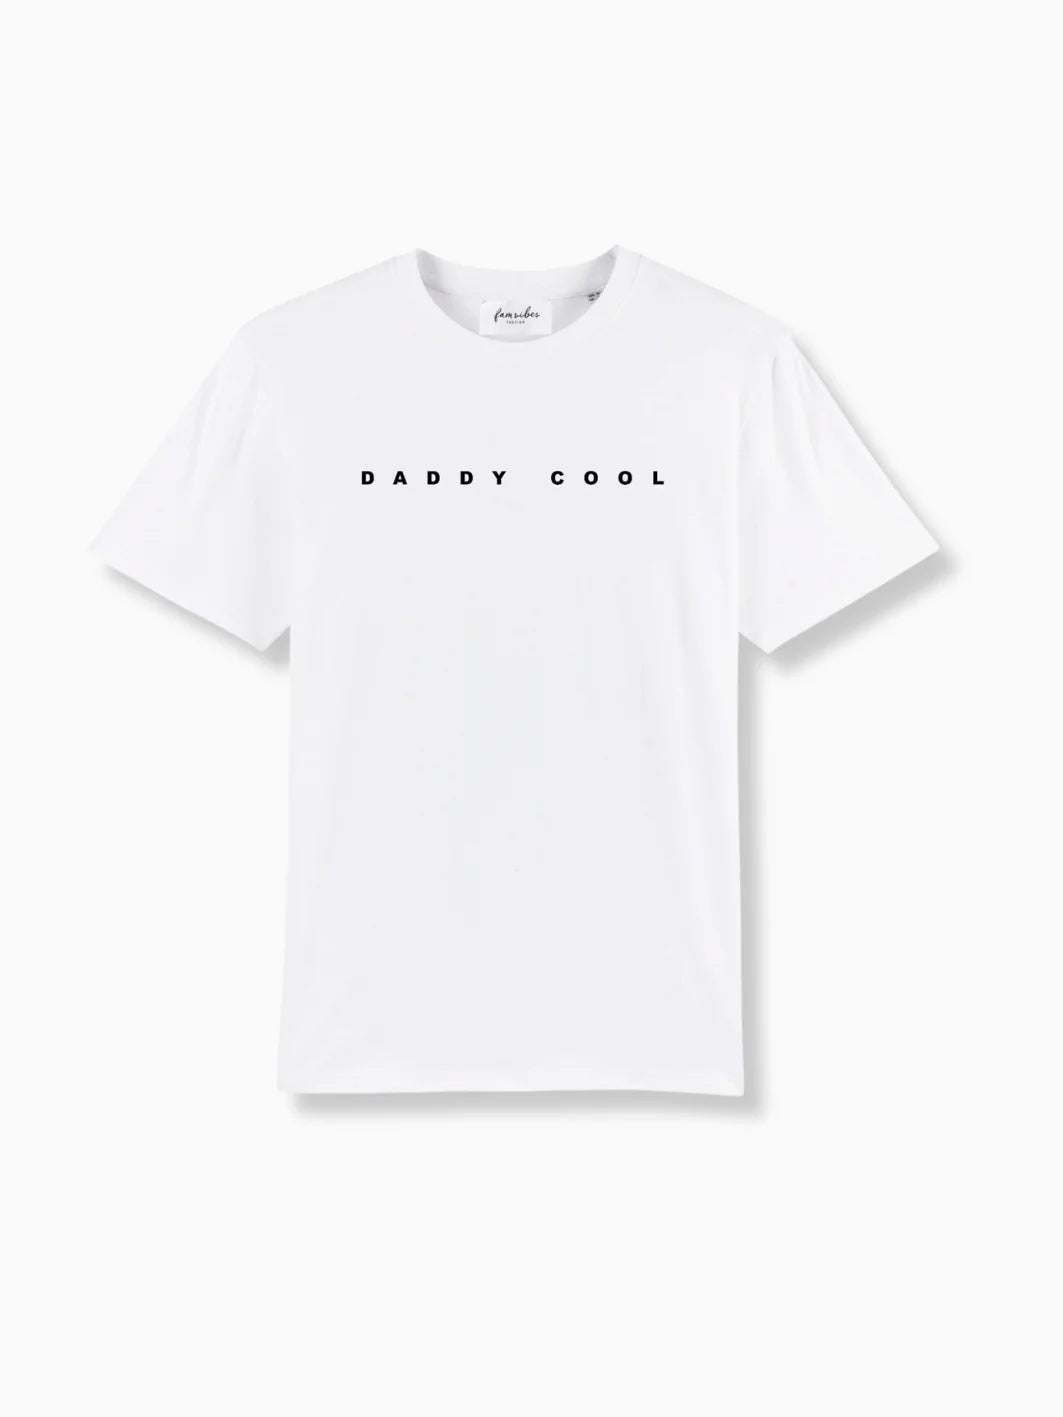 T-Shirt - DADDY COOL